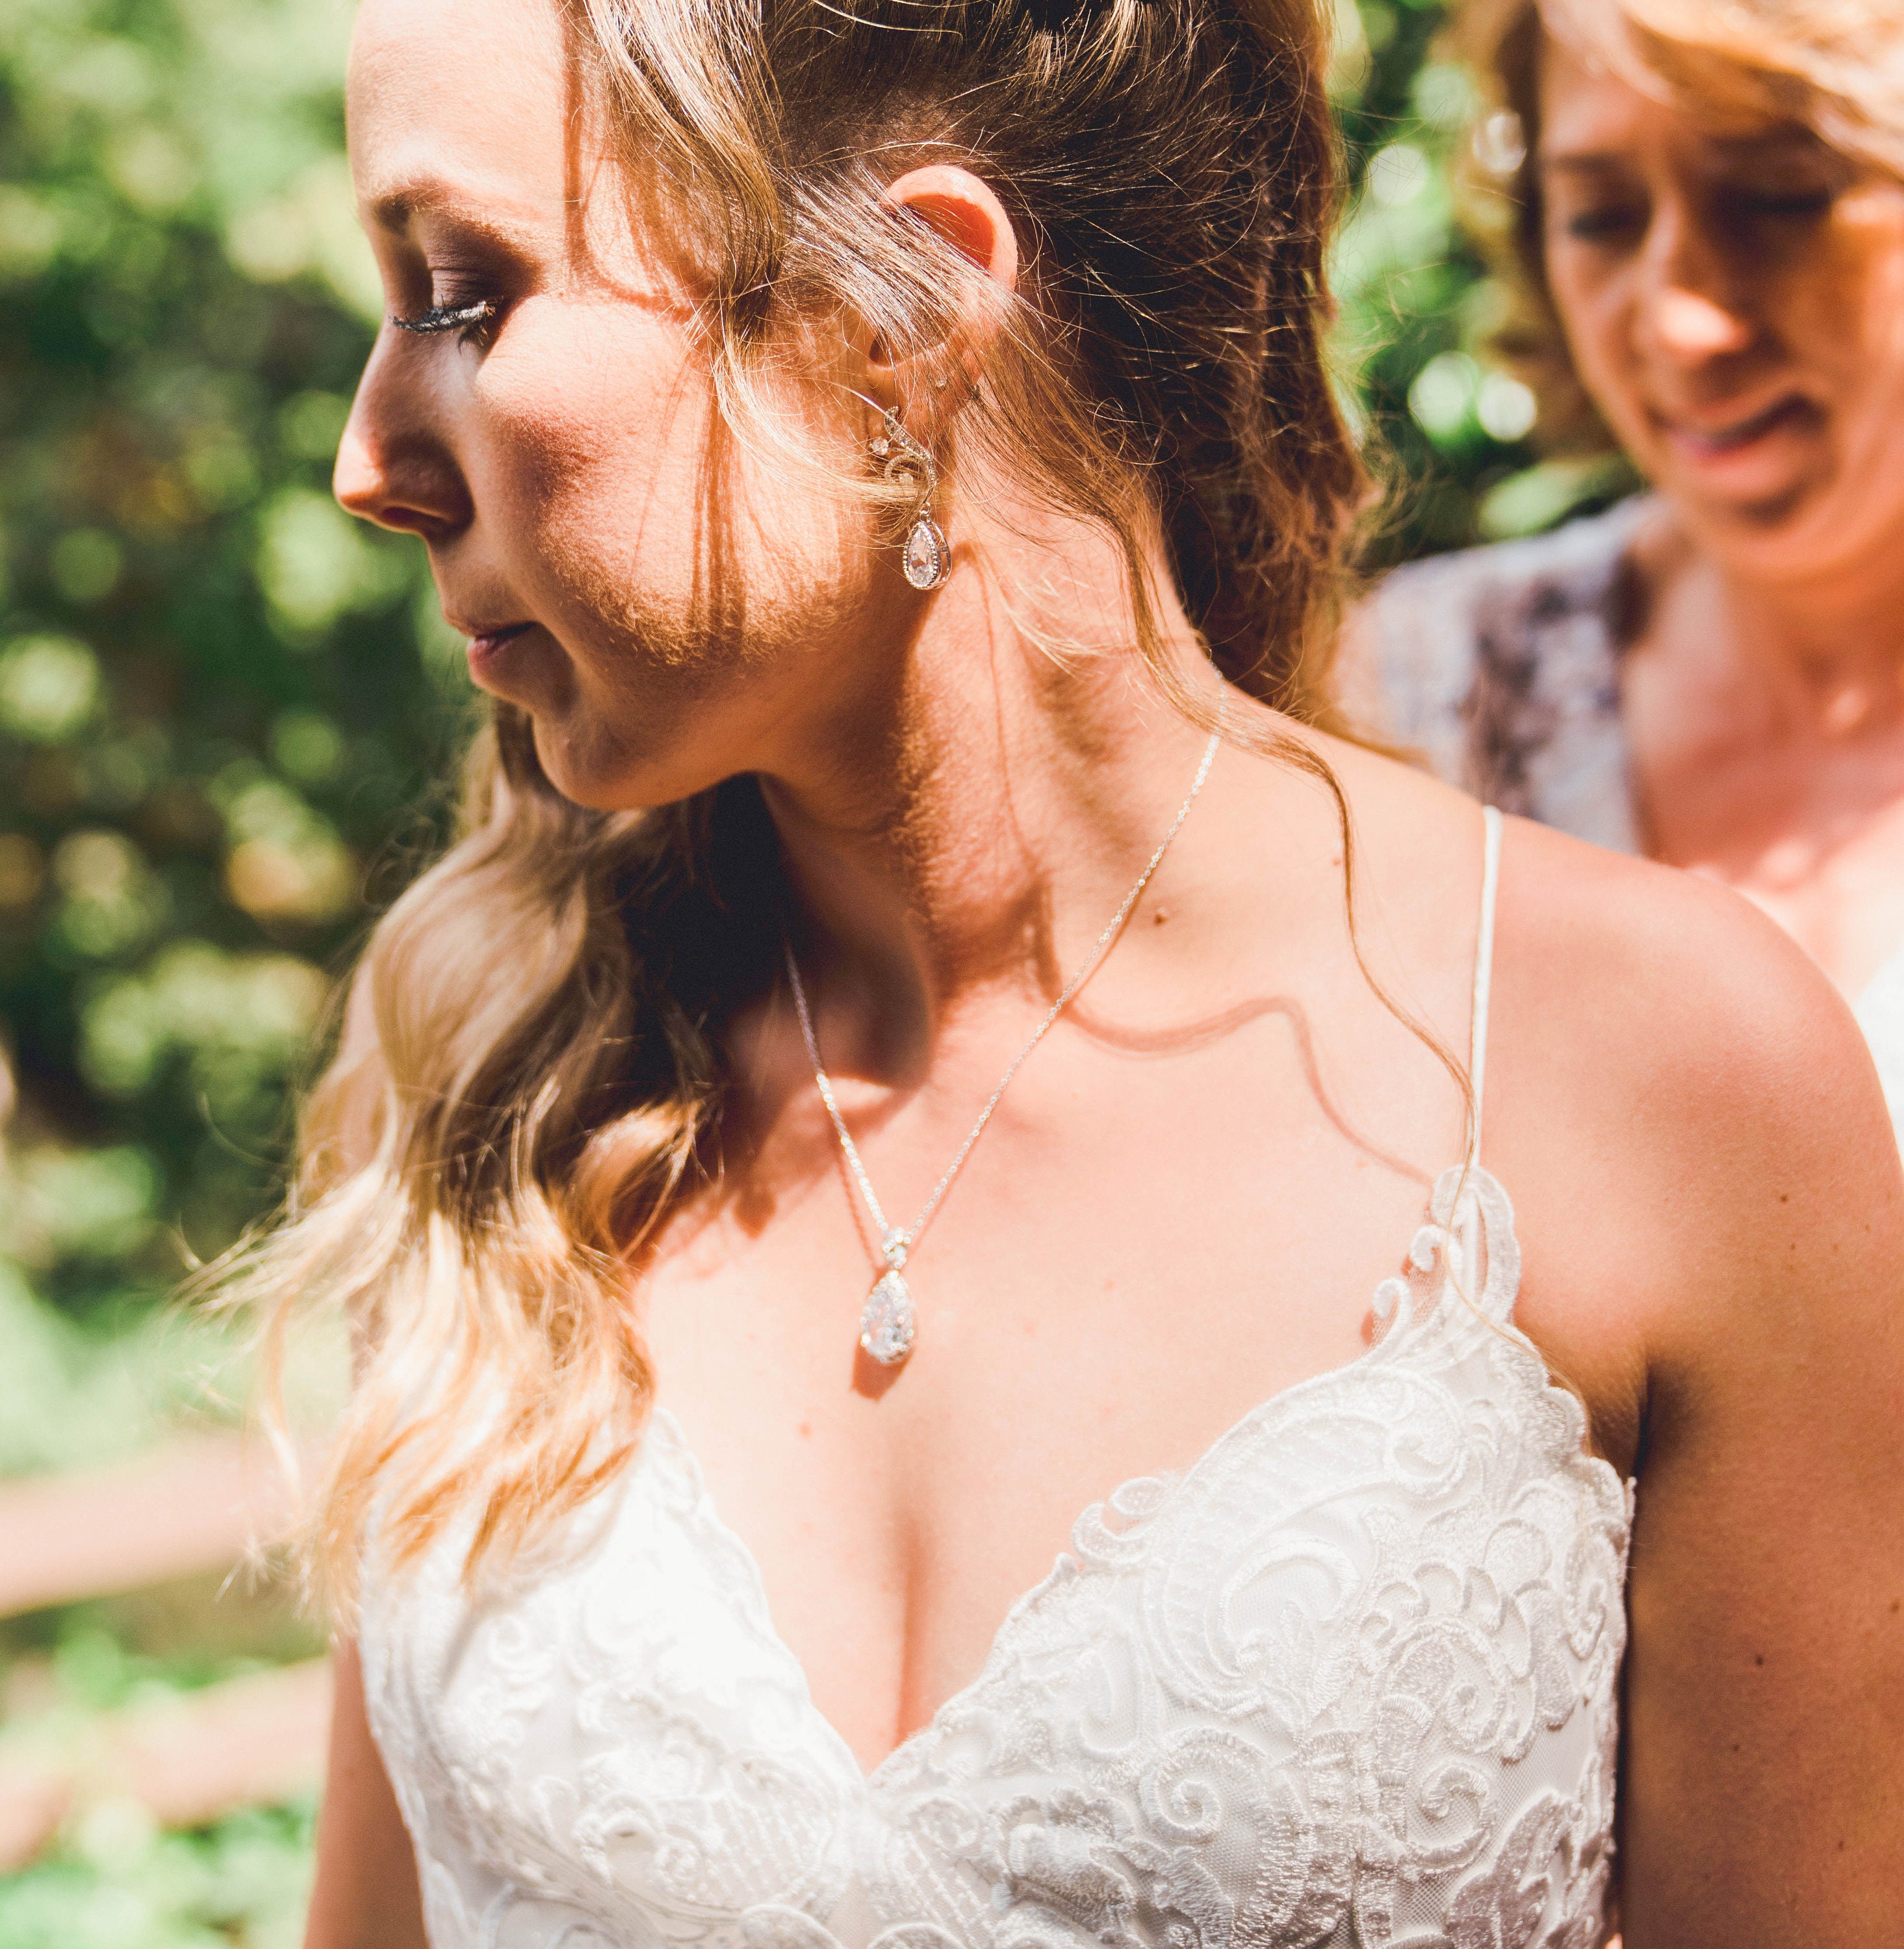 What Jewelry to Wear with V-Neck Wedding Dress? - Ask Emmaline | Bridal  accessories necklace, Boho wedding jewelry, Gold bridal necklace